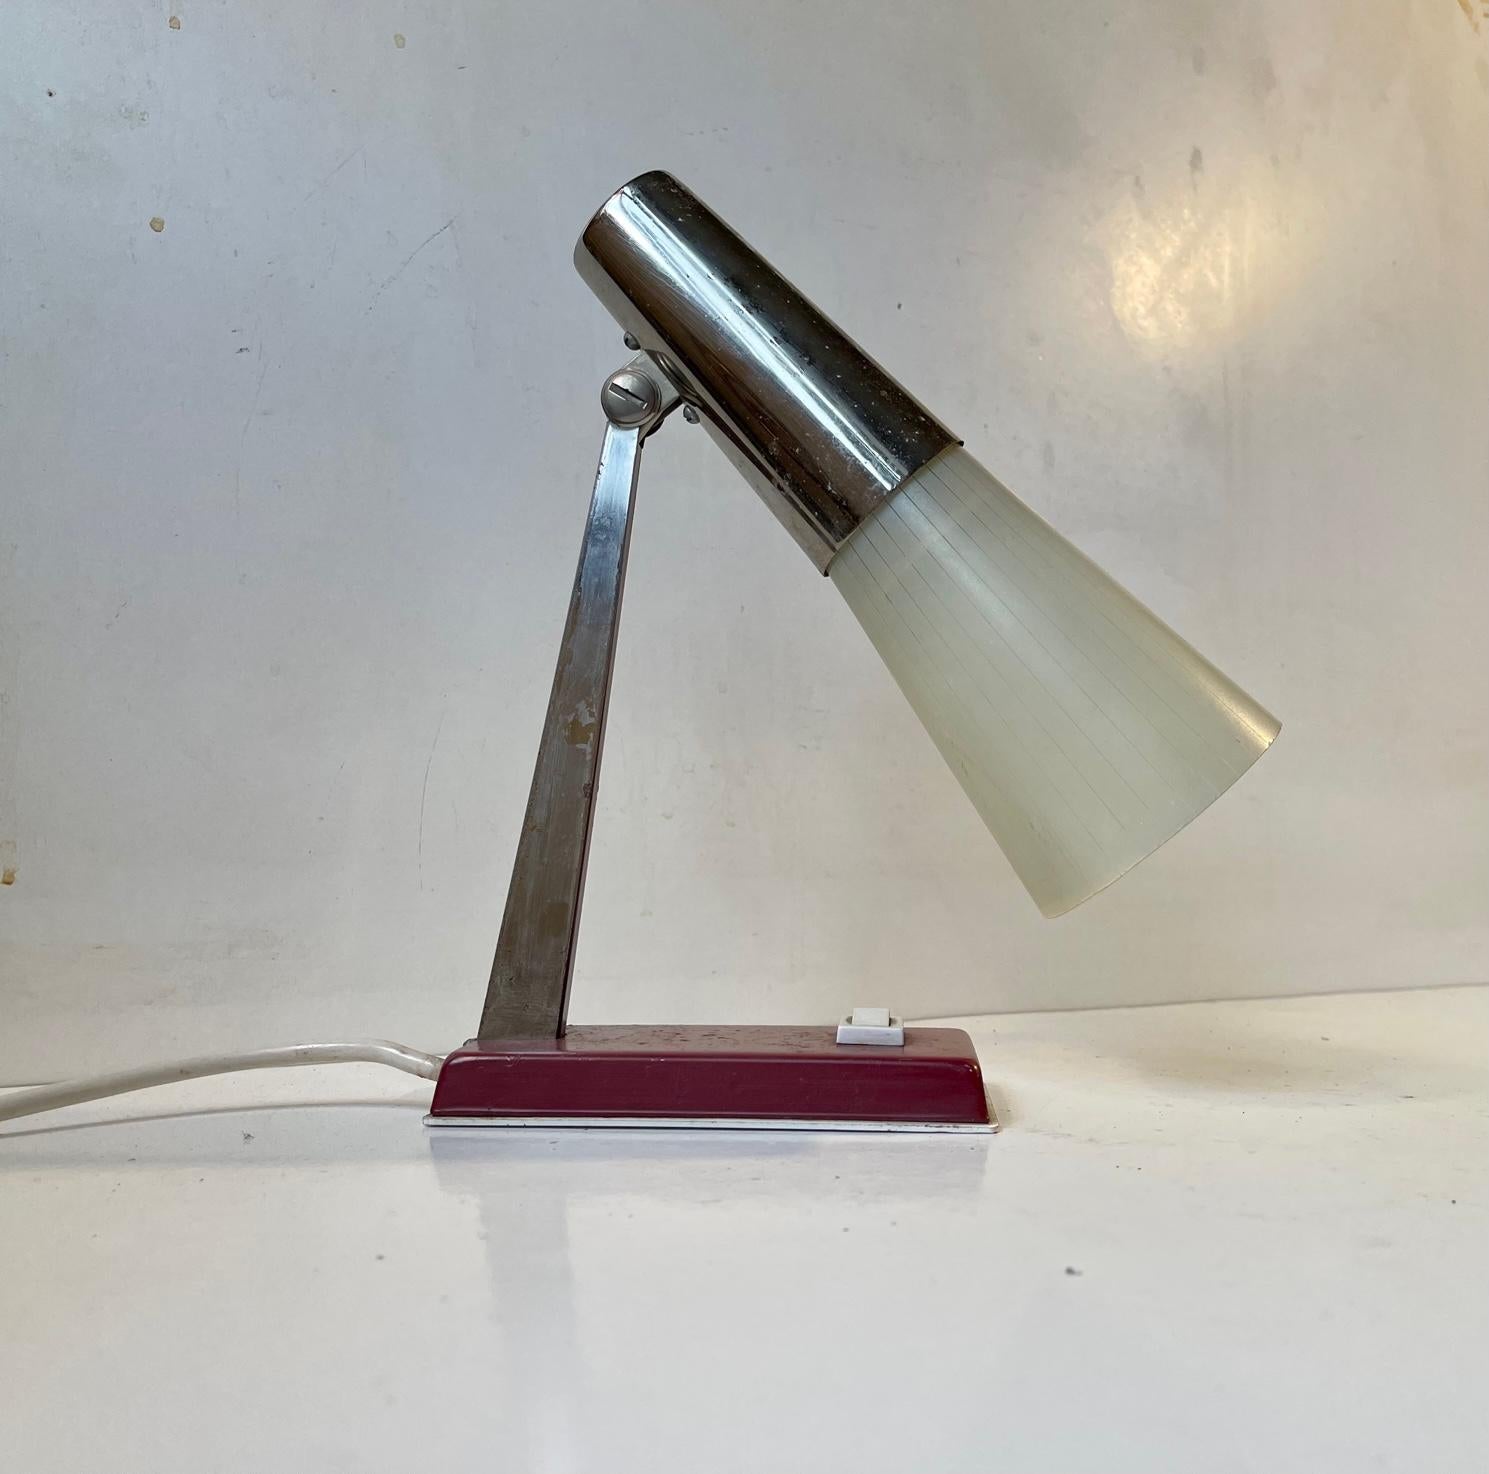 Blown Glass Danish Modern Bedside Table Lamp by Ernest Voss, 1950s For Sale